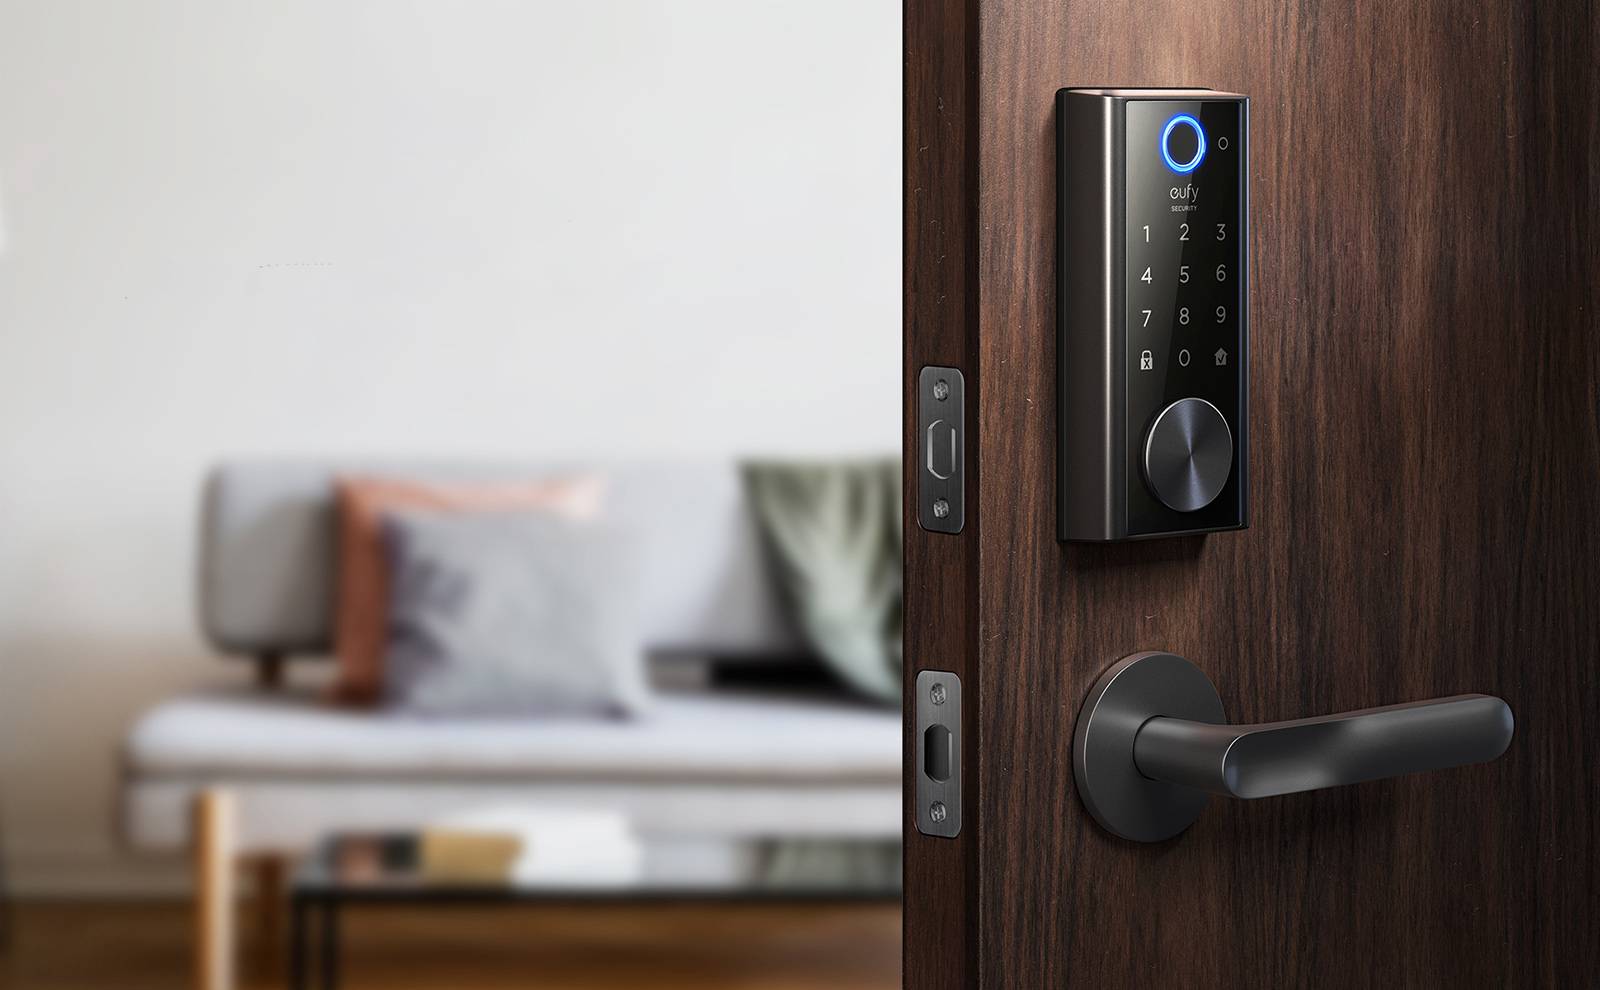 The resplendent eufy Fine Lock Touch with fingerprint liberate ideal bought Amazon’s first cut price